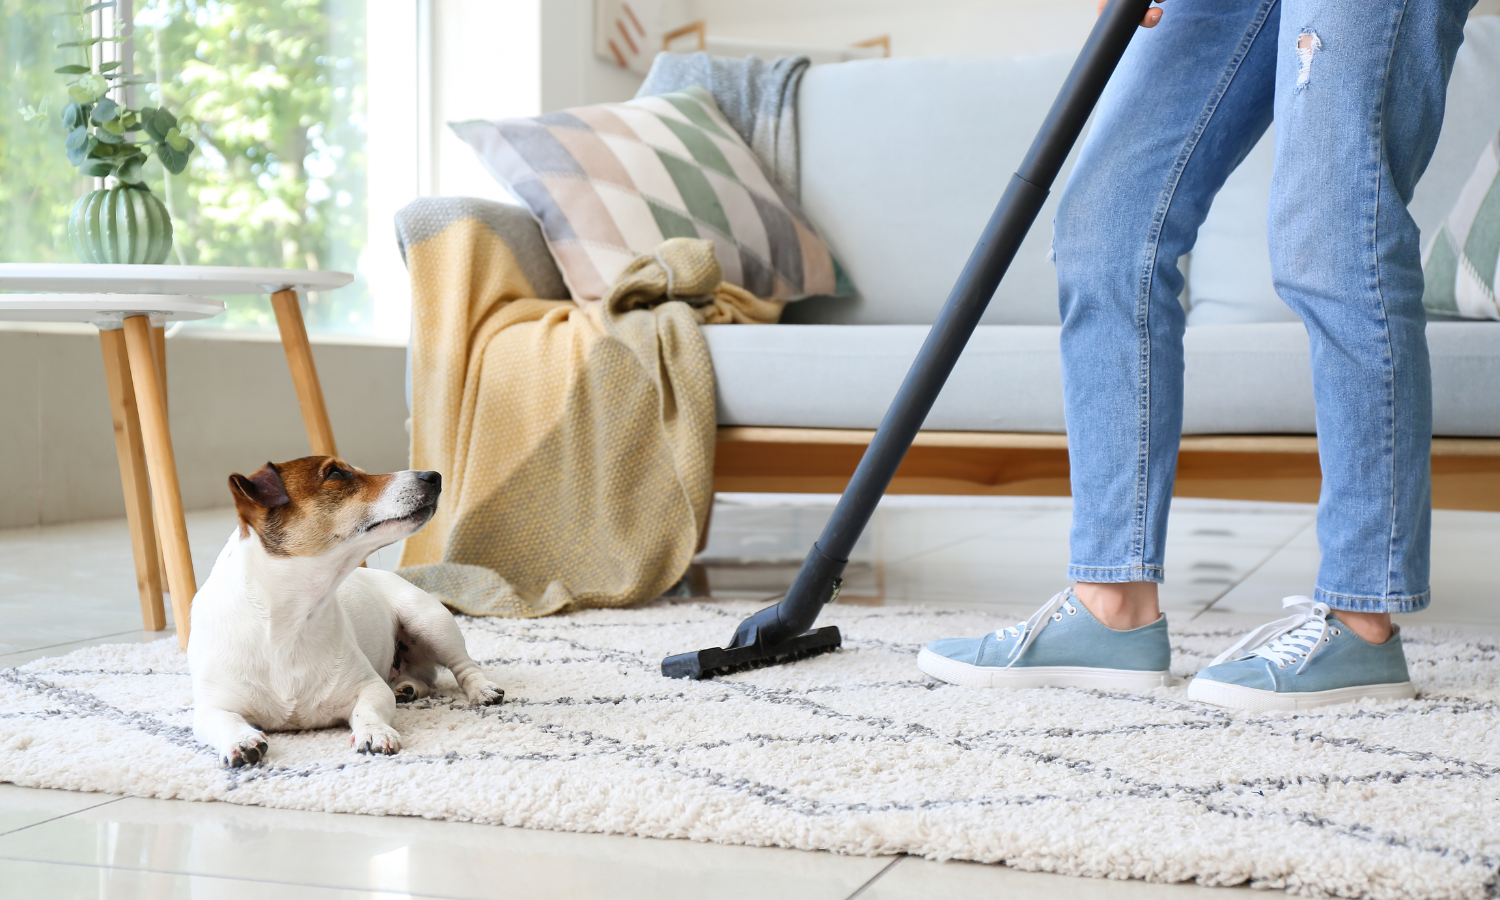 Is-pest-control-safe-for-pets